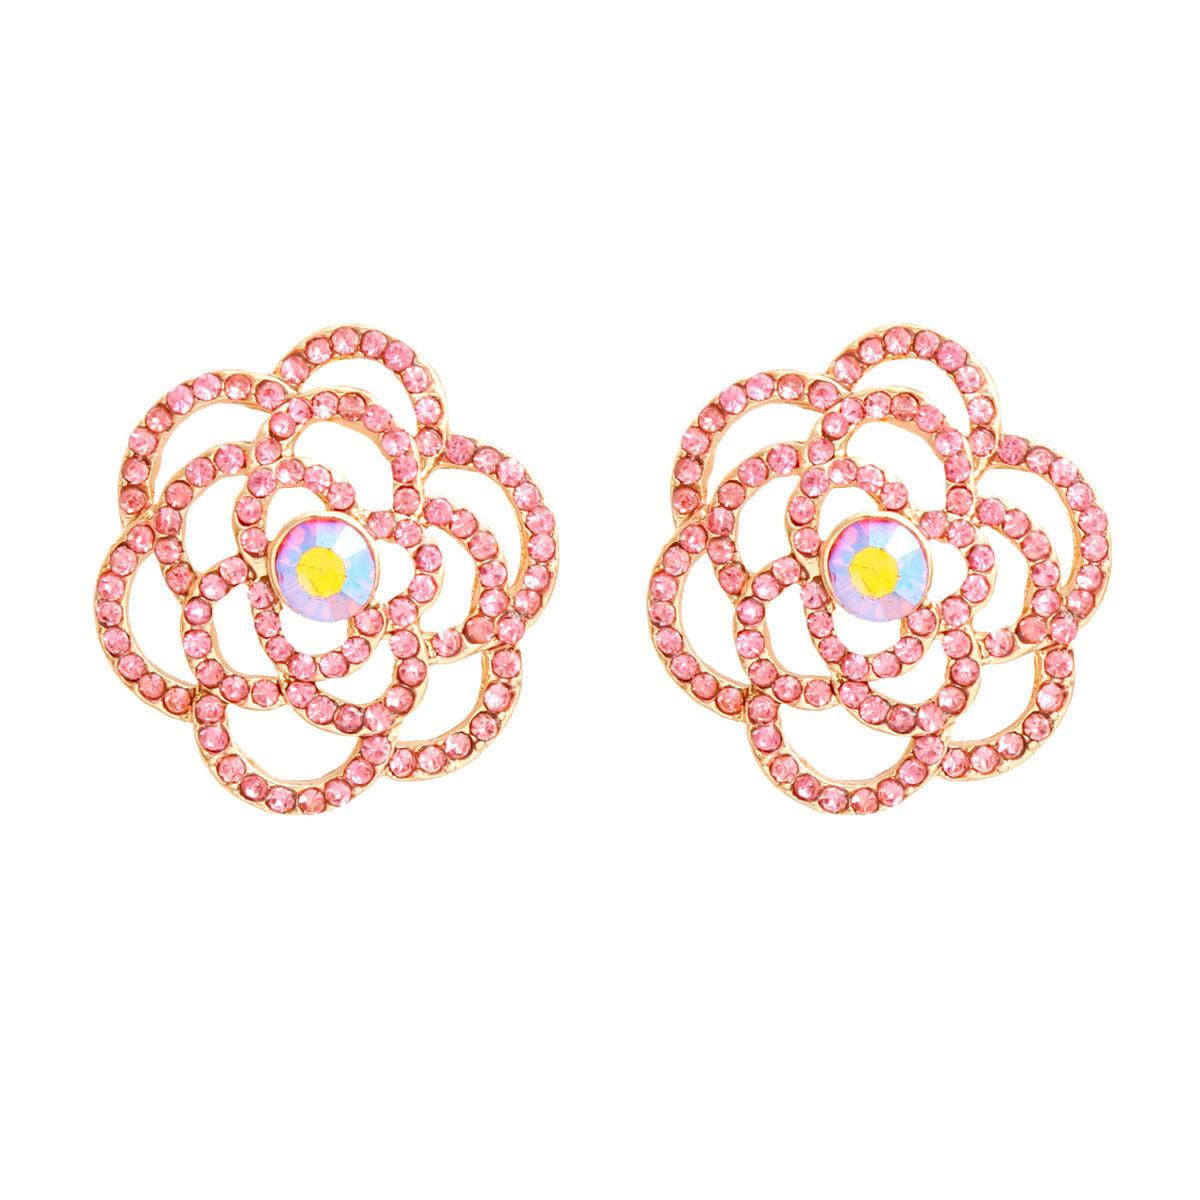 Open Pink Rose Earrings: Chic and Contemporary Style